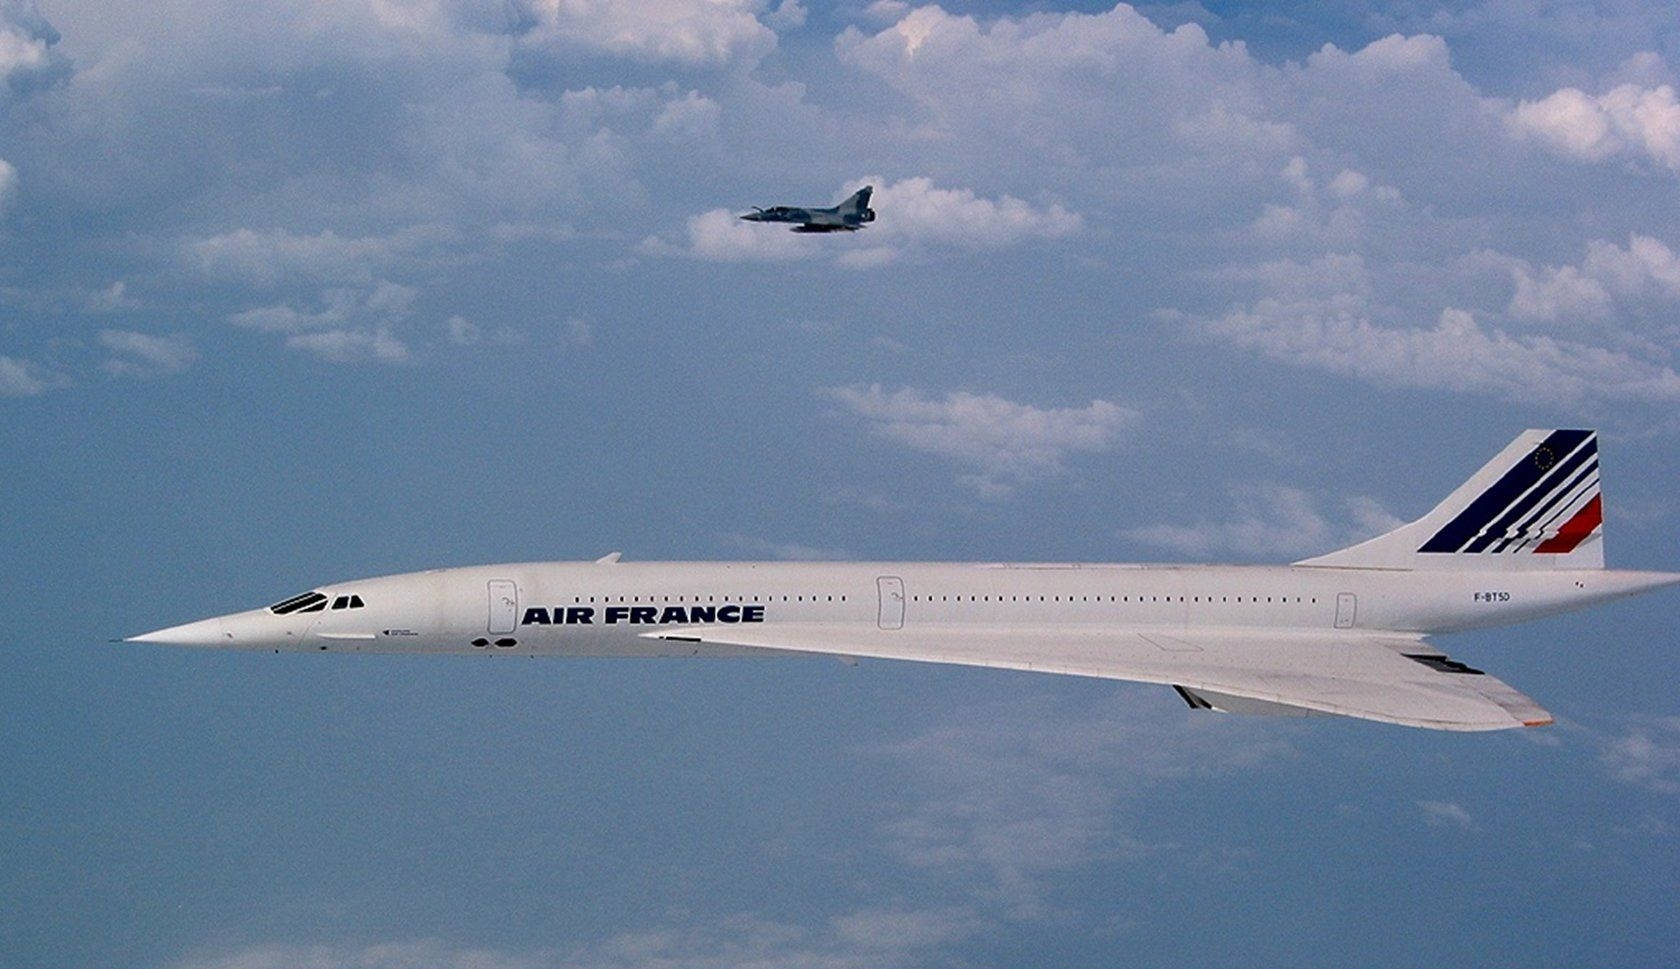 Airfrance Concorde Supersonic Airliner: Aereo Supersonico Concorde Di Air France Sfondo